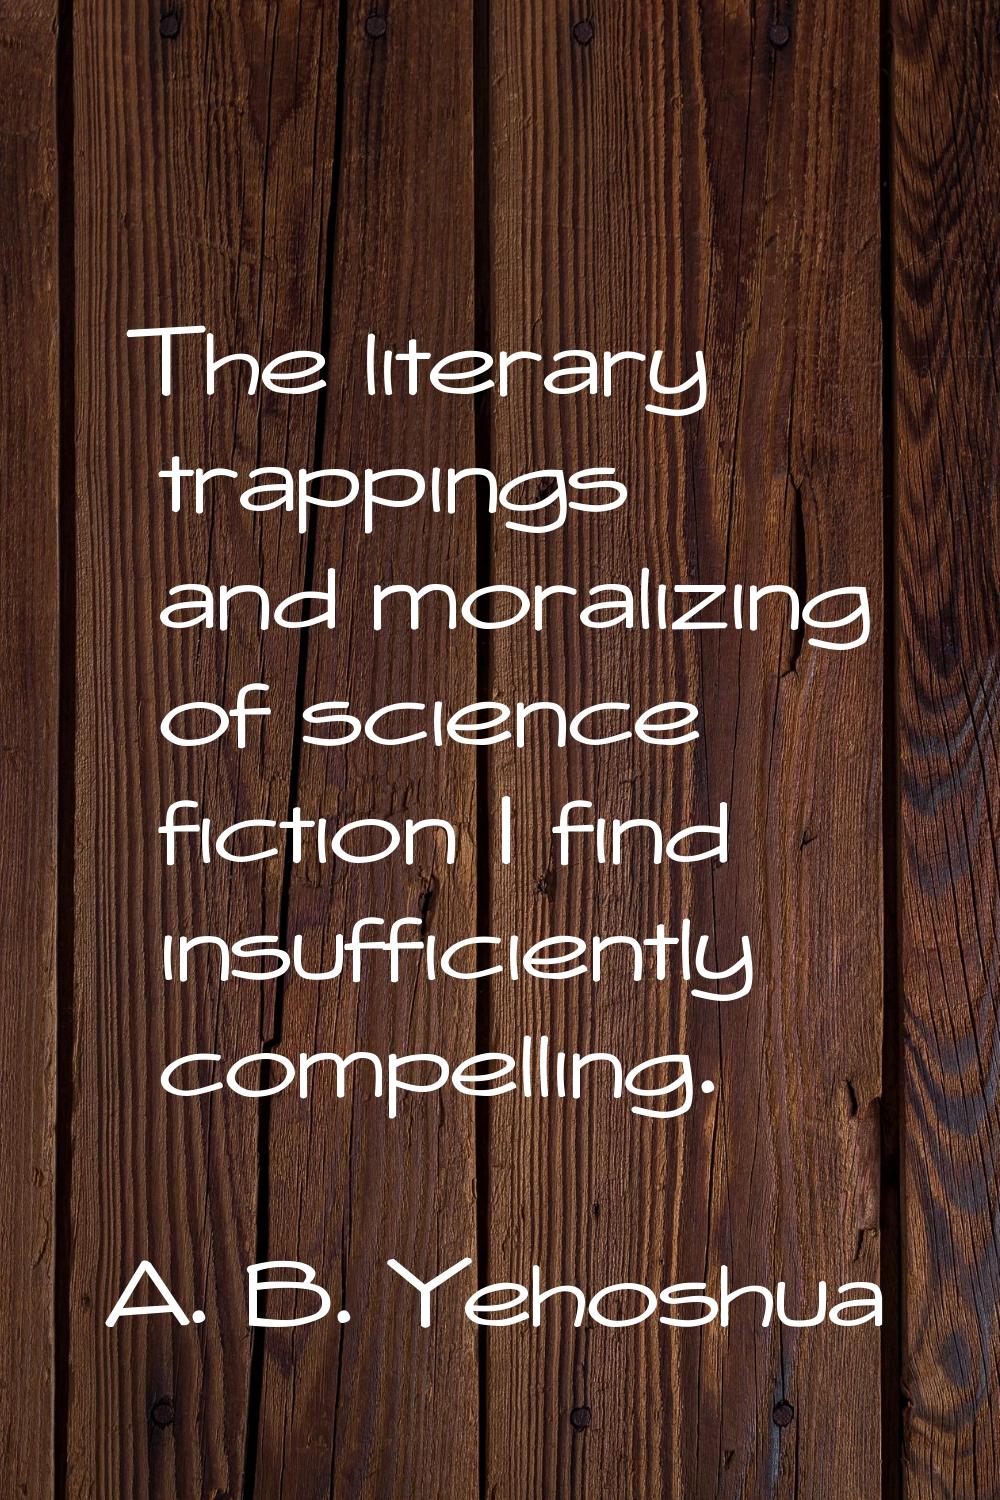 The literary trappings and moralizing of science fiction I find insufficiently compelling.